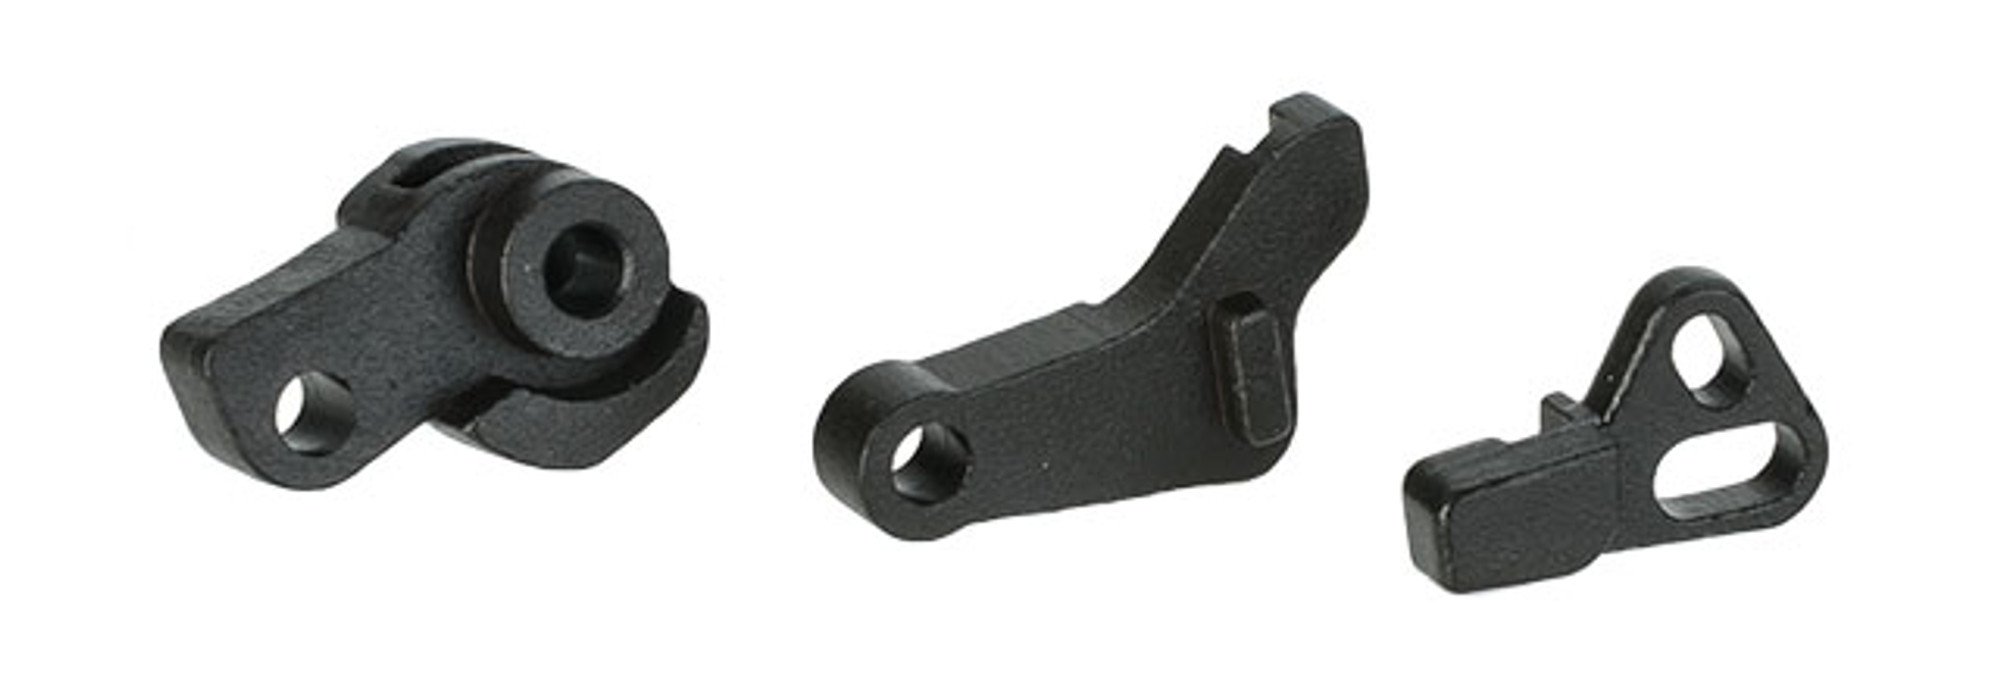 New Age Steel Trigger Sear Set for WE-Tech G-Series Airsoft GBB Pistols